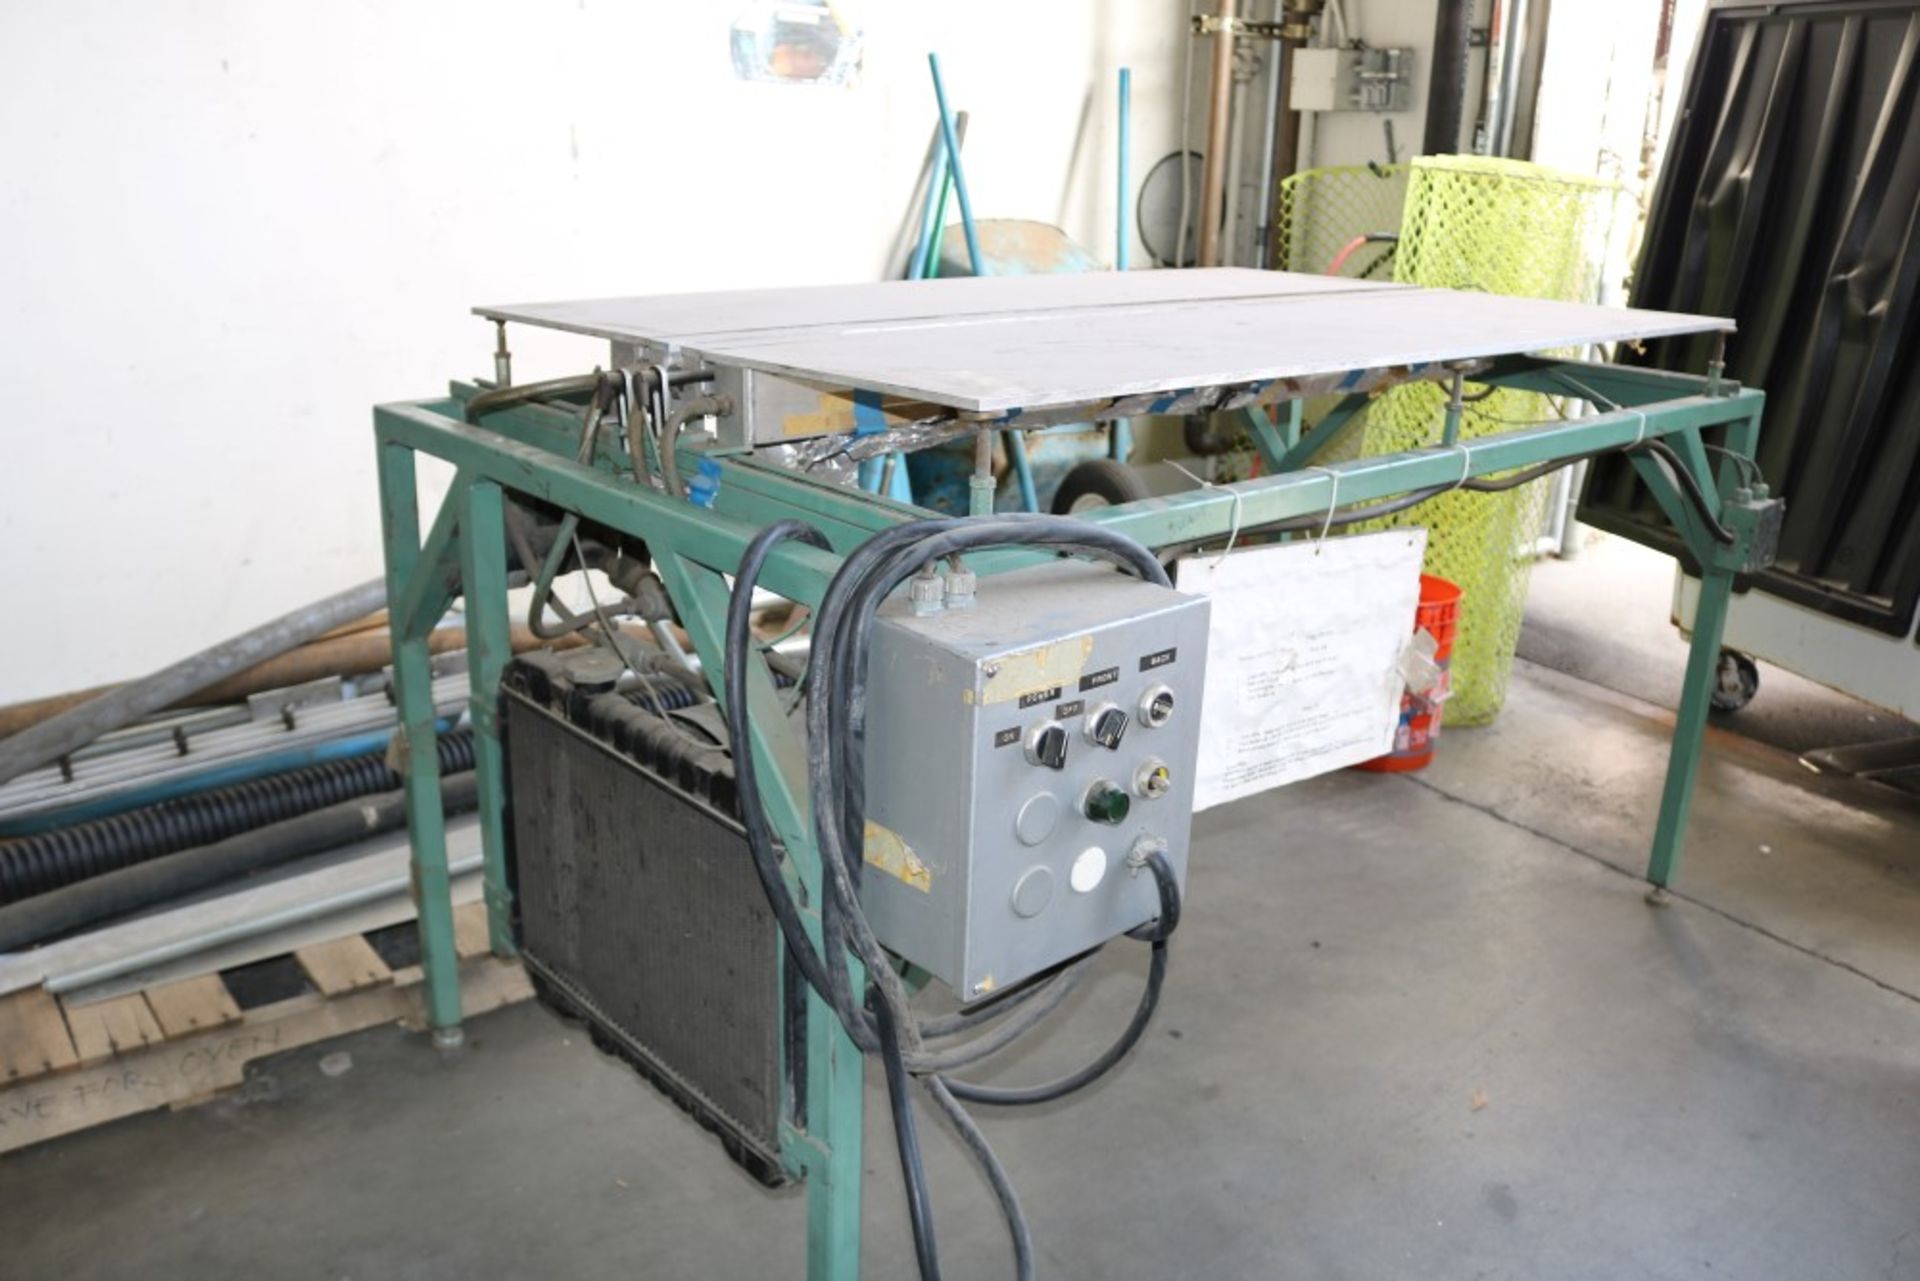 Strip Heater Table, 5' x 3' - Image 4 of 6